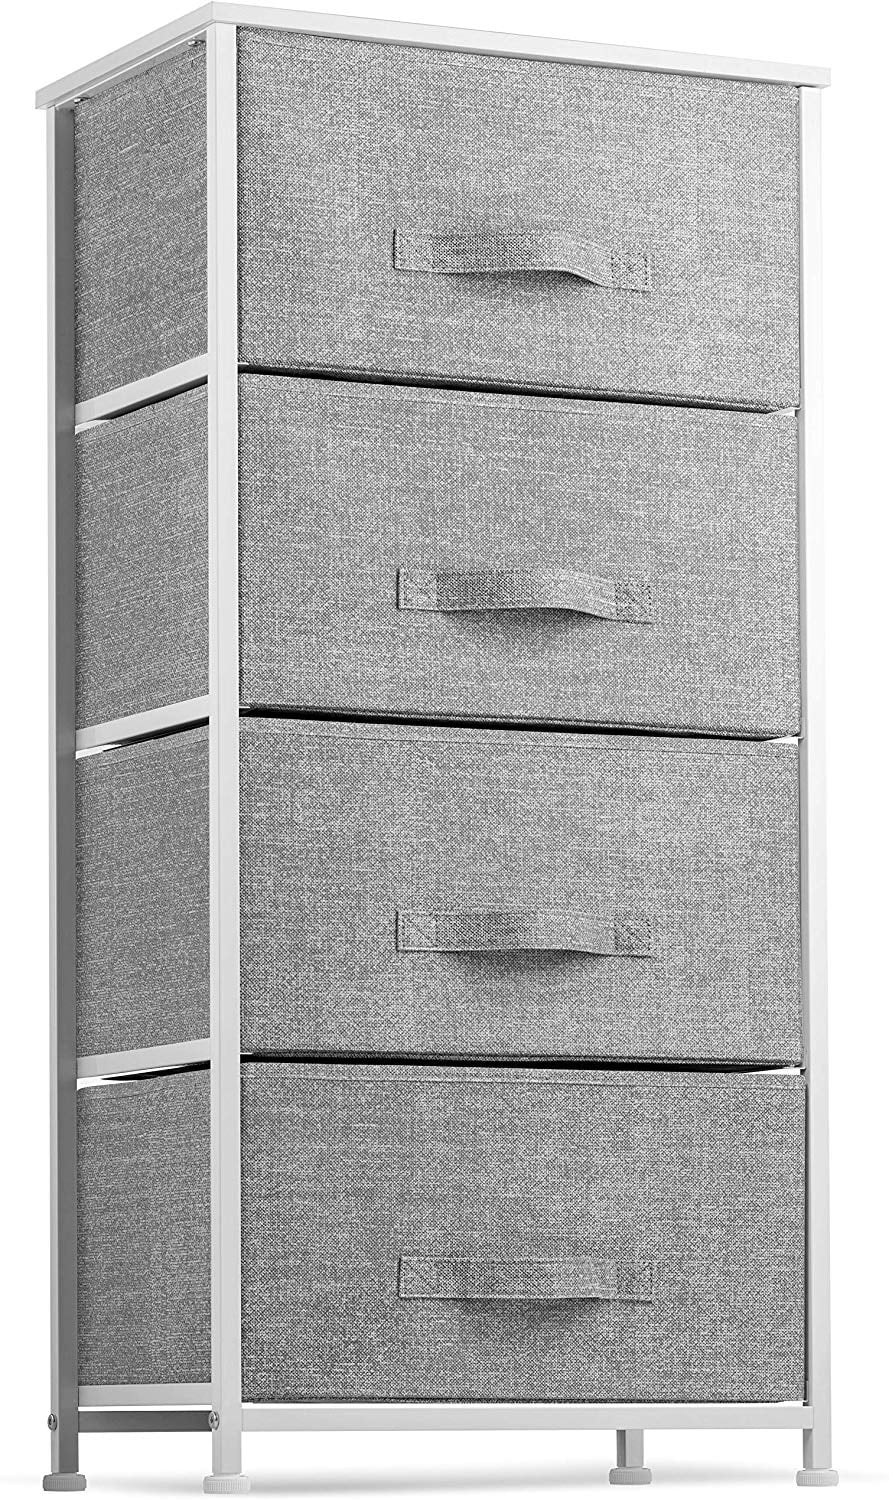 Photo 1 of 4 Drawer Dresser Organizer Tall Fabric Storage Tower for Bedroom, Hallway, Entryway, Closets, Nurseries. Furniture Storage Chest Sturdy Steel Frame, Wood Top, Easy Pull Handle Textured Print Drawers